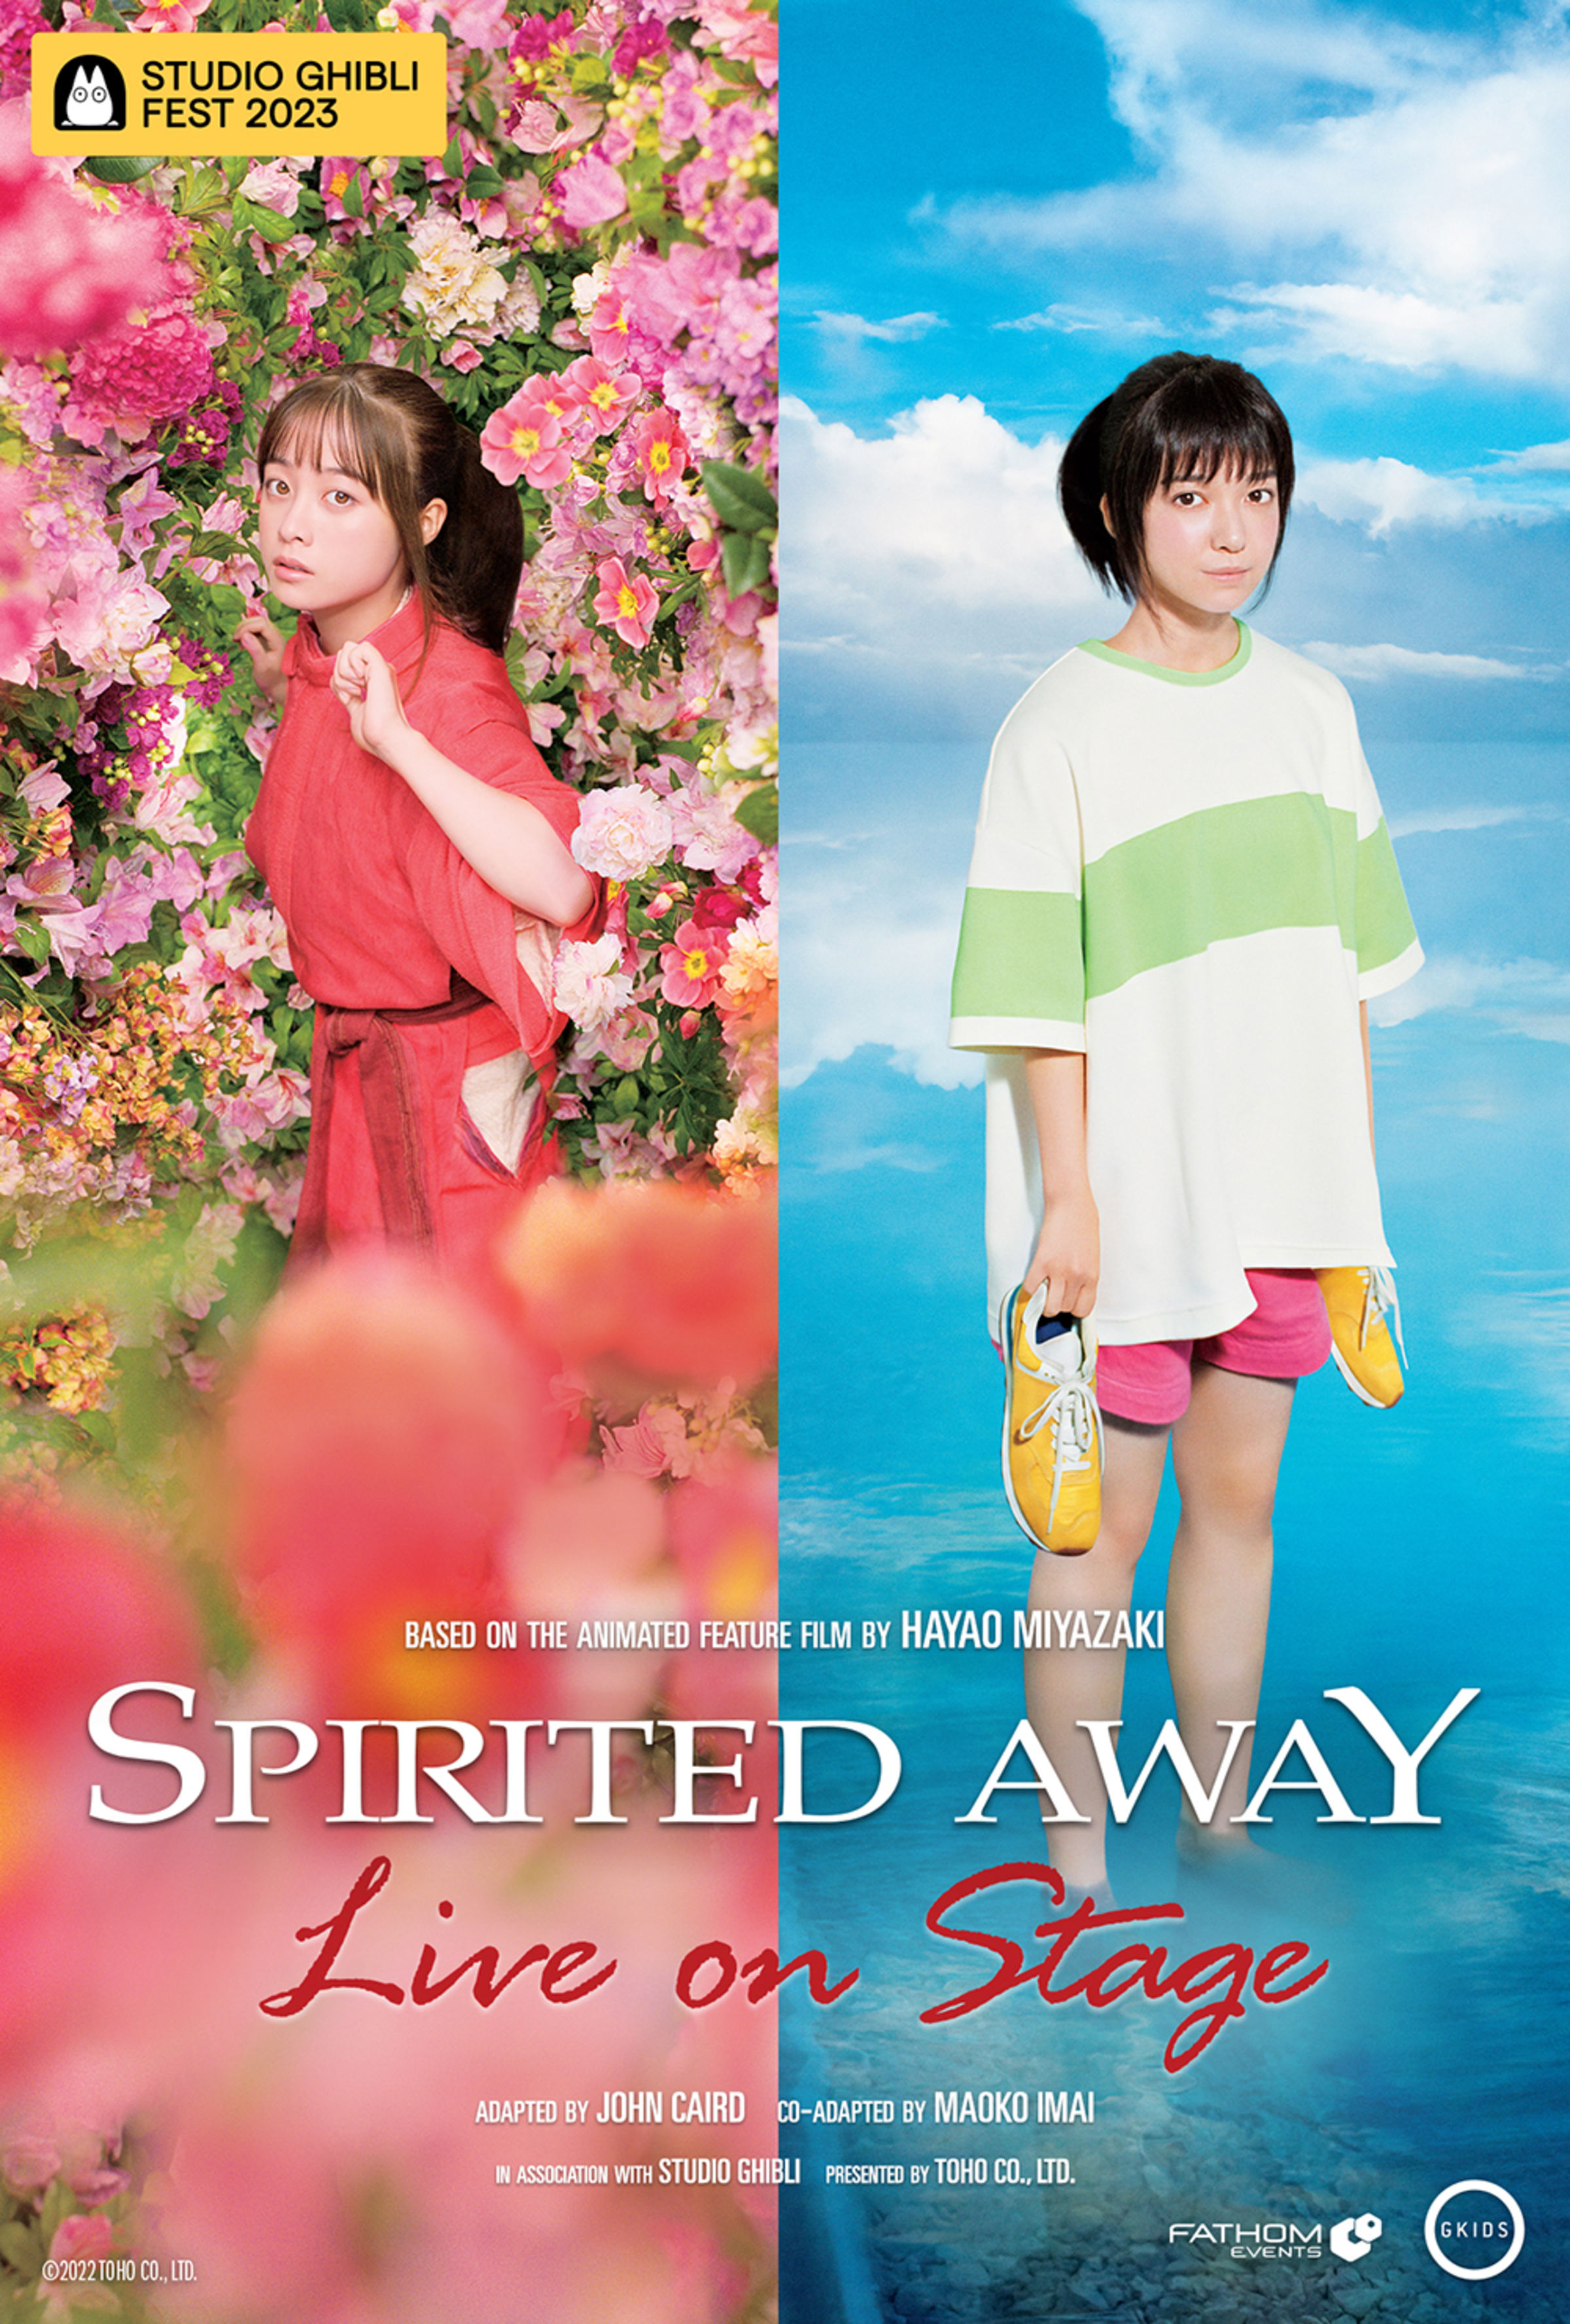 SPIRITED AWAY Live on Stage Fathom Events